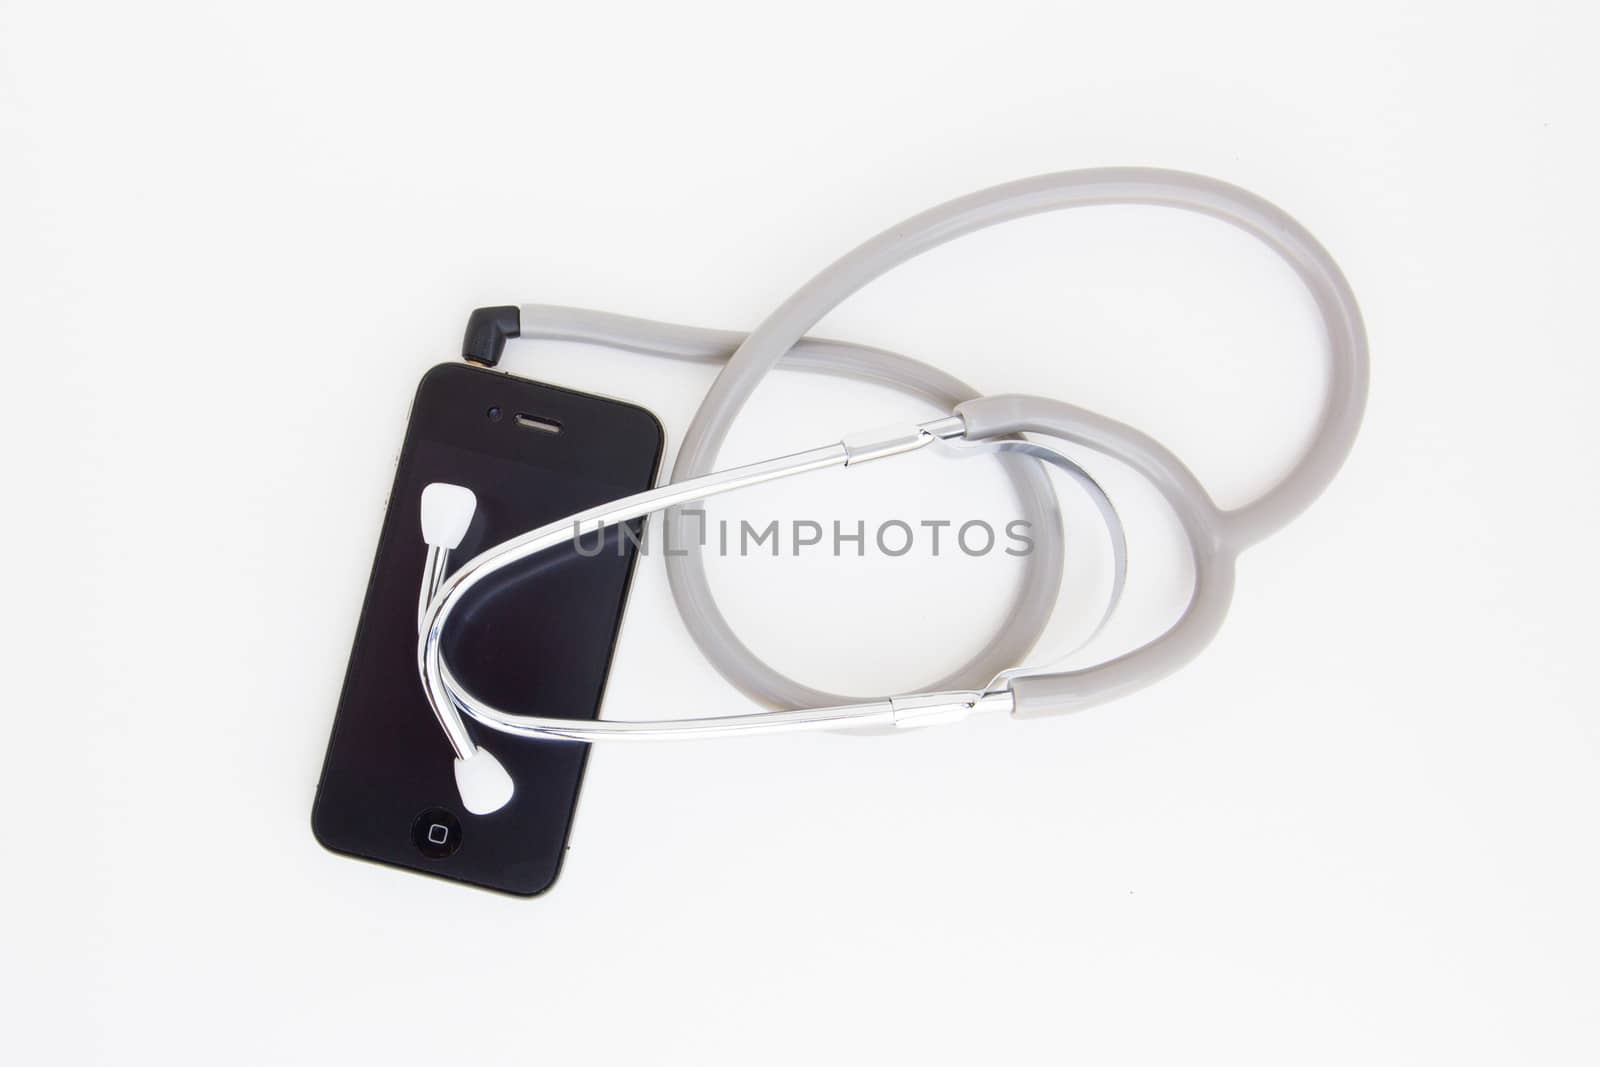 Stethoscope headphone for smartphone  by a3701027